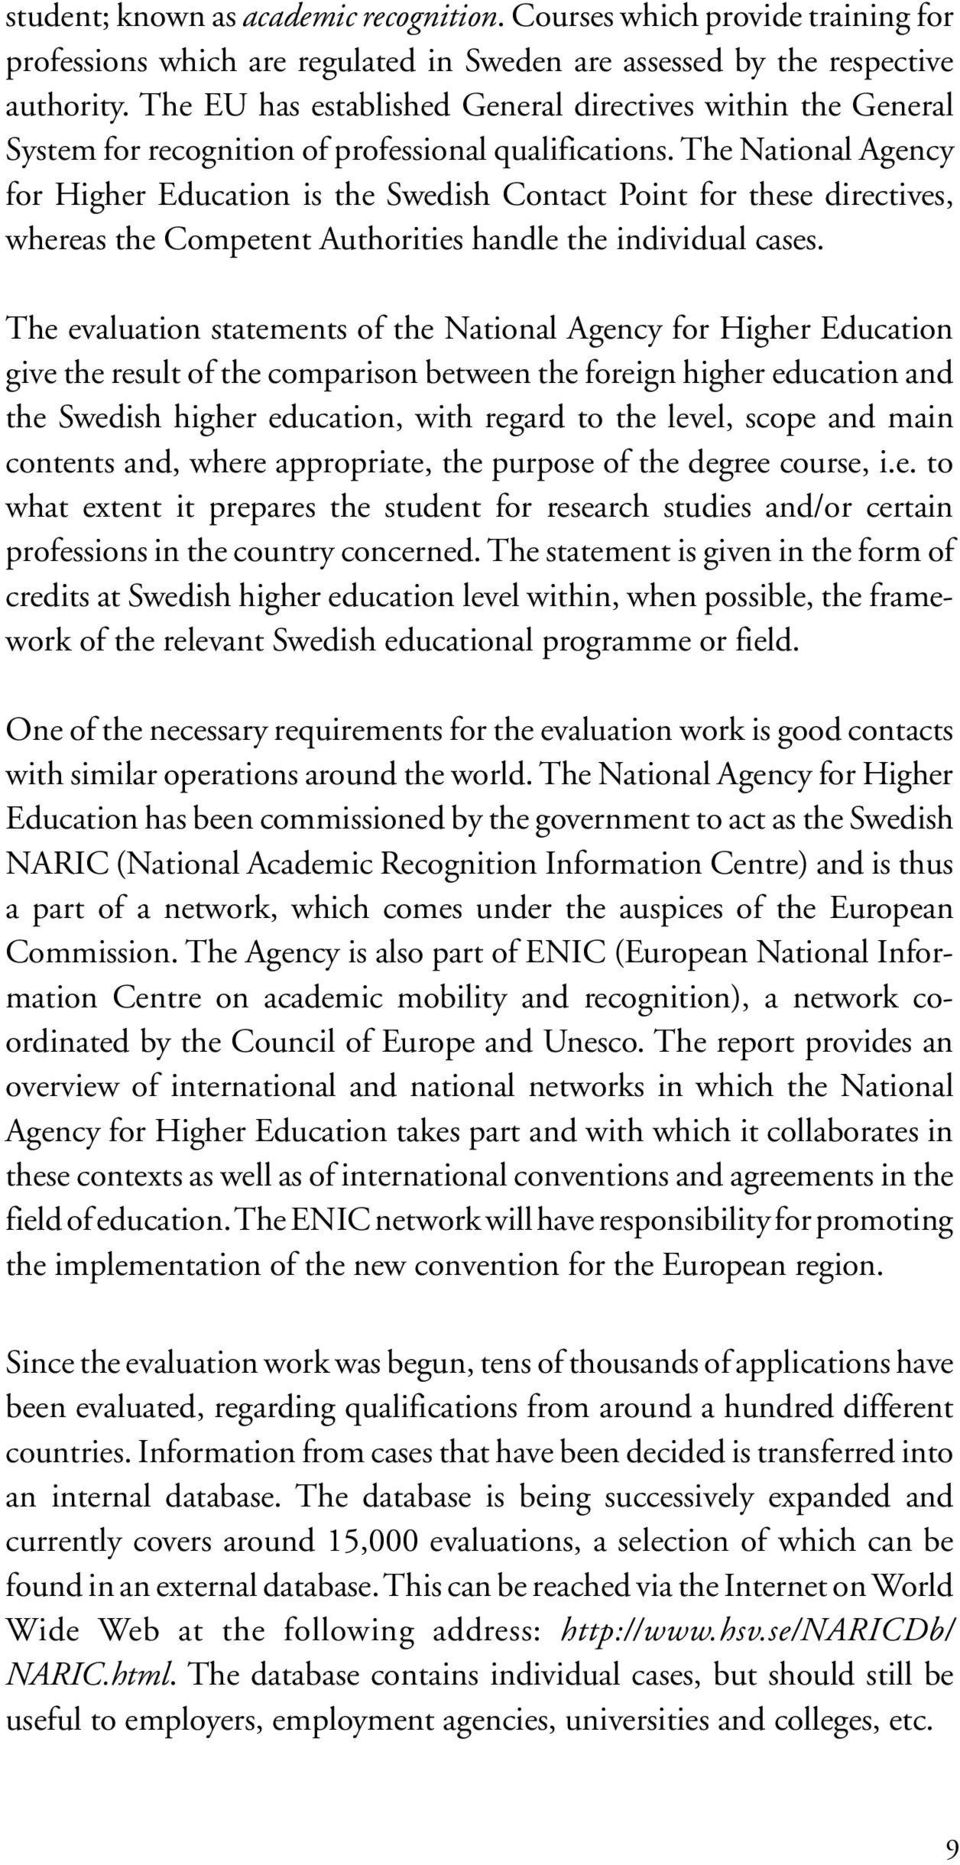 The National Agency for Higher Education is the Swedish Contact Point for these directives, whereas the Competent Authorities handle the individual cases.